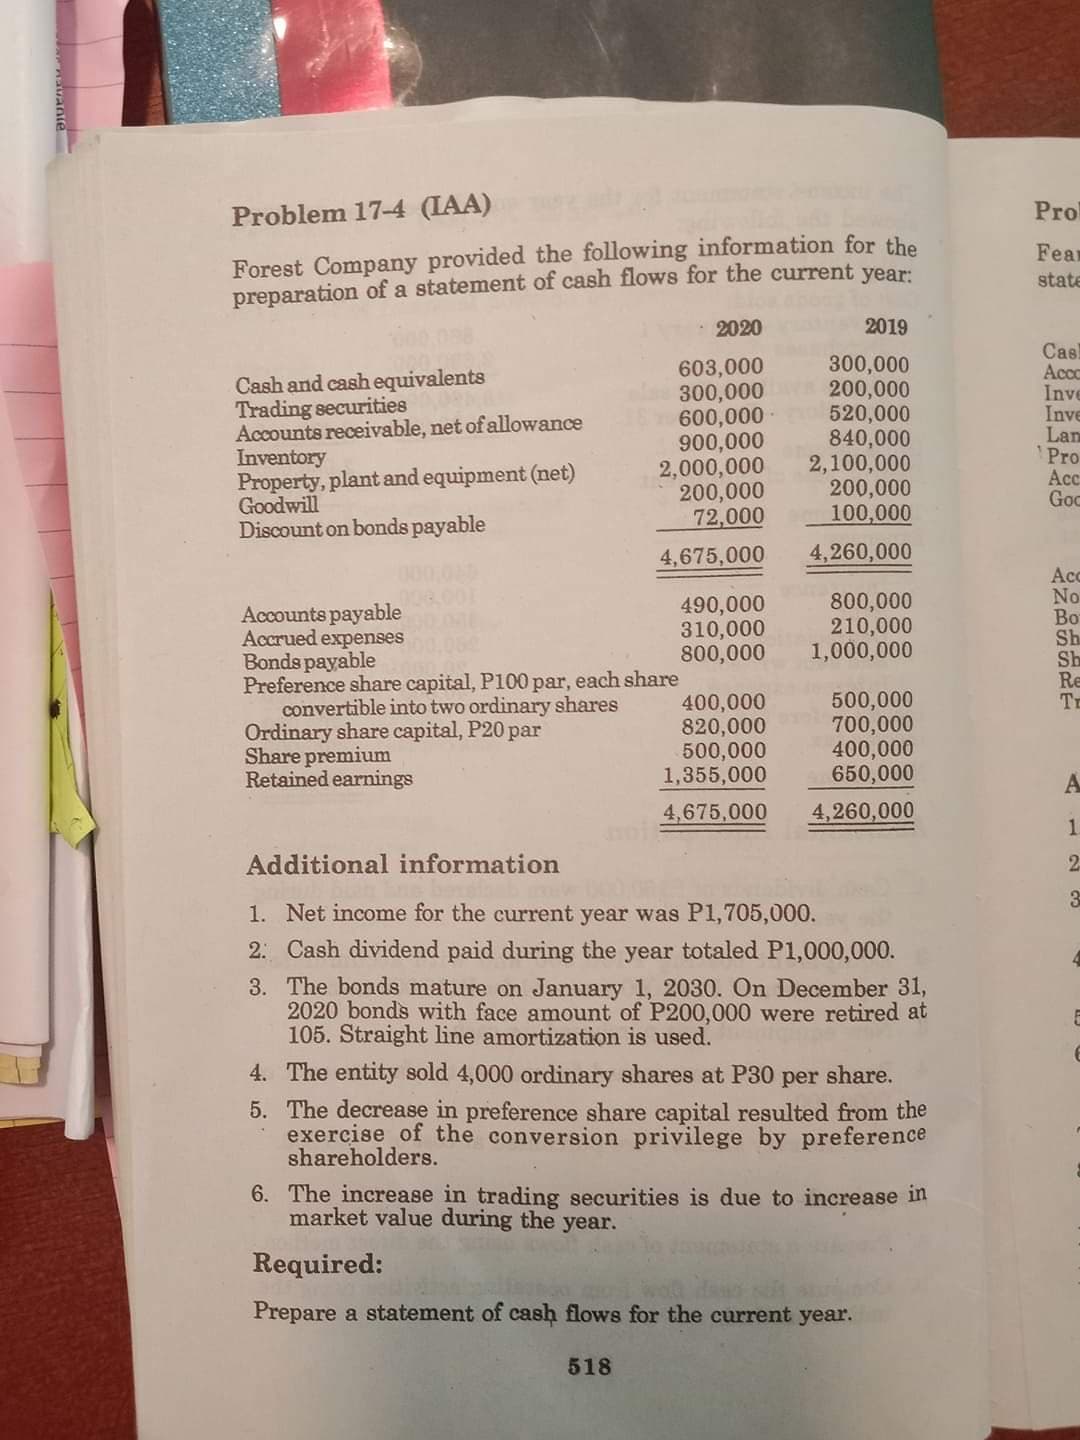 Problem 17-4 (IAA)
Pro
Forest Company provided the following information for the
preparation of a statement of cash flows for the current year
Fear
state
2020
2019
Cas!
Accc
Inve
Inve
Lan
Pro
Acc
Goc
300,000
Cash and cash equivalents
Trading securities
Accounts receivable, net of allowance
Inventory
Property, plant and equipment (net)
Goodwill
Discount on bonds payable
603,000
300,000 200,000
600,000
900,000
2,000,000
200,000
72,000
520,000
840,000
2,100,000
200,000
100,000
4,675,000
4,260,000
Acc
No
Во
Sh.
Sh
Re
Tr
490,000
310,000
800,000
800,000
210,000
1,000,000
Accounts payable
Accrued expenses
Bonds payable
Preference share capital, P100 par, each share
convertible into two ordinary shares
Ordinary share capital, P20 par
Share premium
Retained earnings
500,000
700,000
400,000
650,000
400,000
820,000
500,000
1,355,000
A
4,675,000
4,260,000
1.
Additional information
2.
1. Net income for the current year was P1,705,000.
2. Cash dividend paid during the year totaled P1,000,000.
3. The bonds mature on January 1, 2030. On December 31,
2020 bonds with face amount of P200,000 were retired at
105. Straight line amortization is used.
4. The entity sold 4,000 ordinary shares at P30 per share.
5. The decrease in preference share capital resulted from the
exercise of the conversion privilege by preference
shareholders.
6. The increase in trading securities is due to increase in
market value during the year.
Required:
wo da s
Prepare a statement of cash flows for the current year.
518
